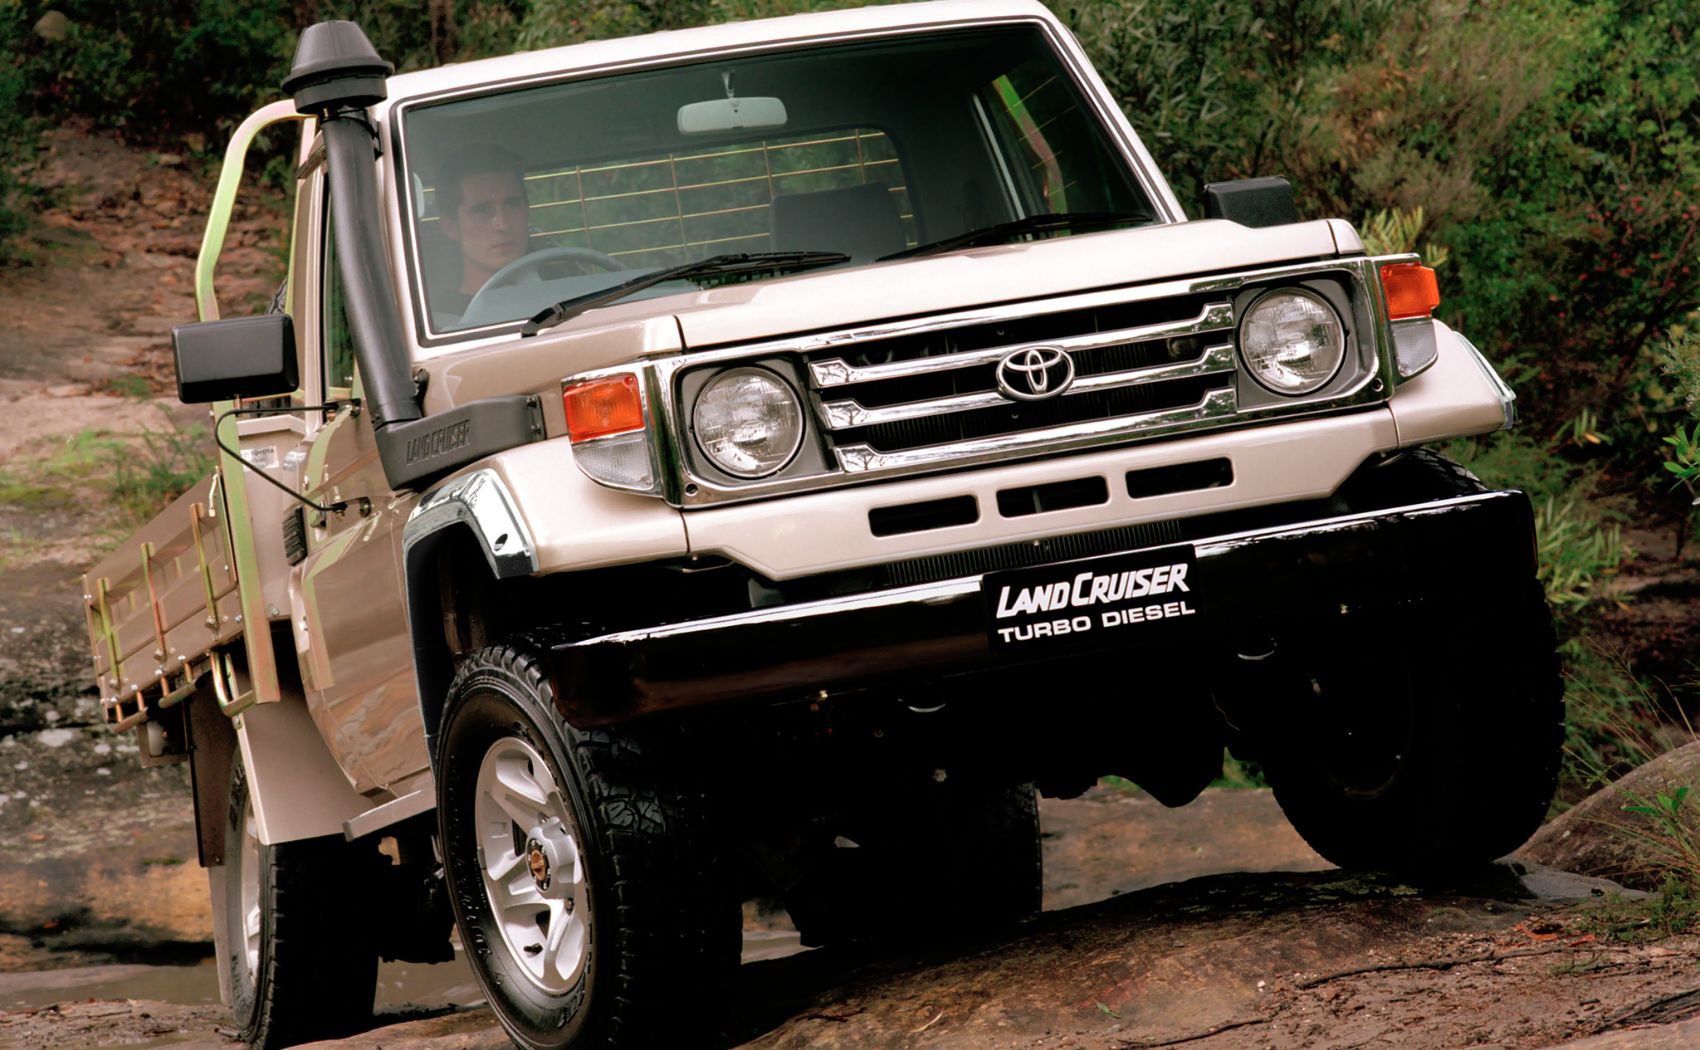 a-look-at-the-iconic-70-series-land-cruiser-the-most-reliable-toyota-ever-built_1.jpg